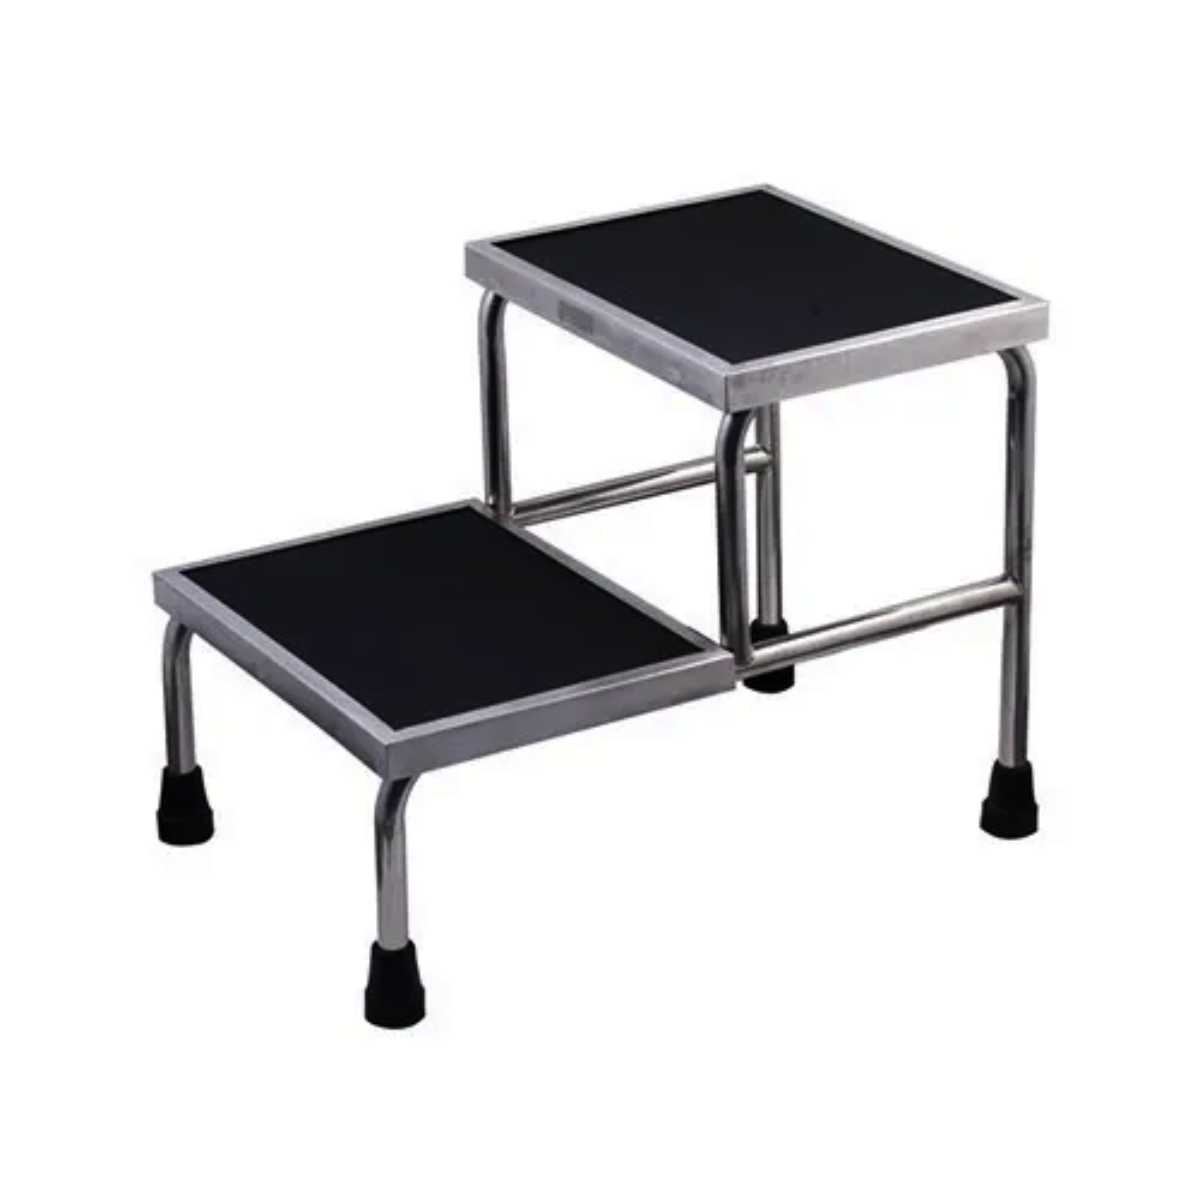 Two-Step Stainless Steel Foot Stool - UMF Medical